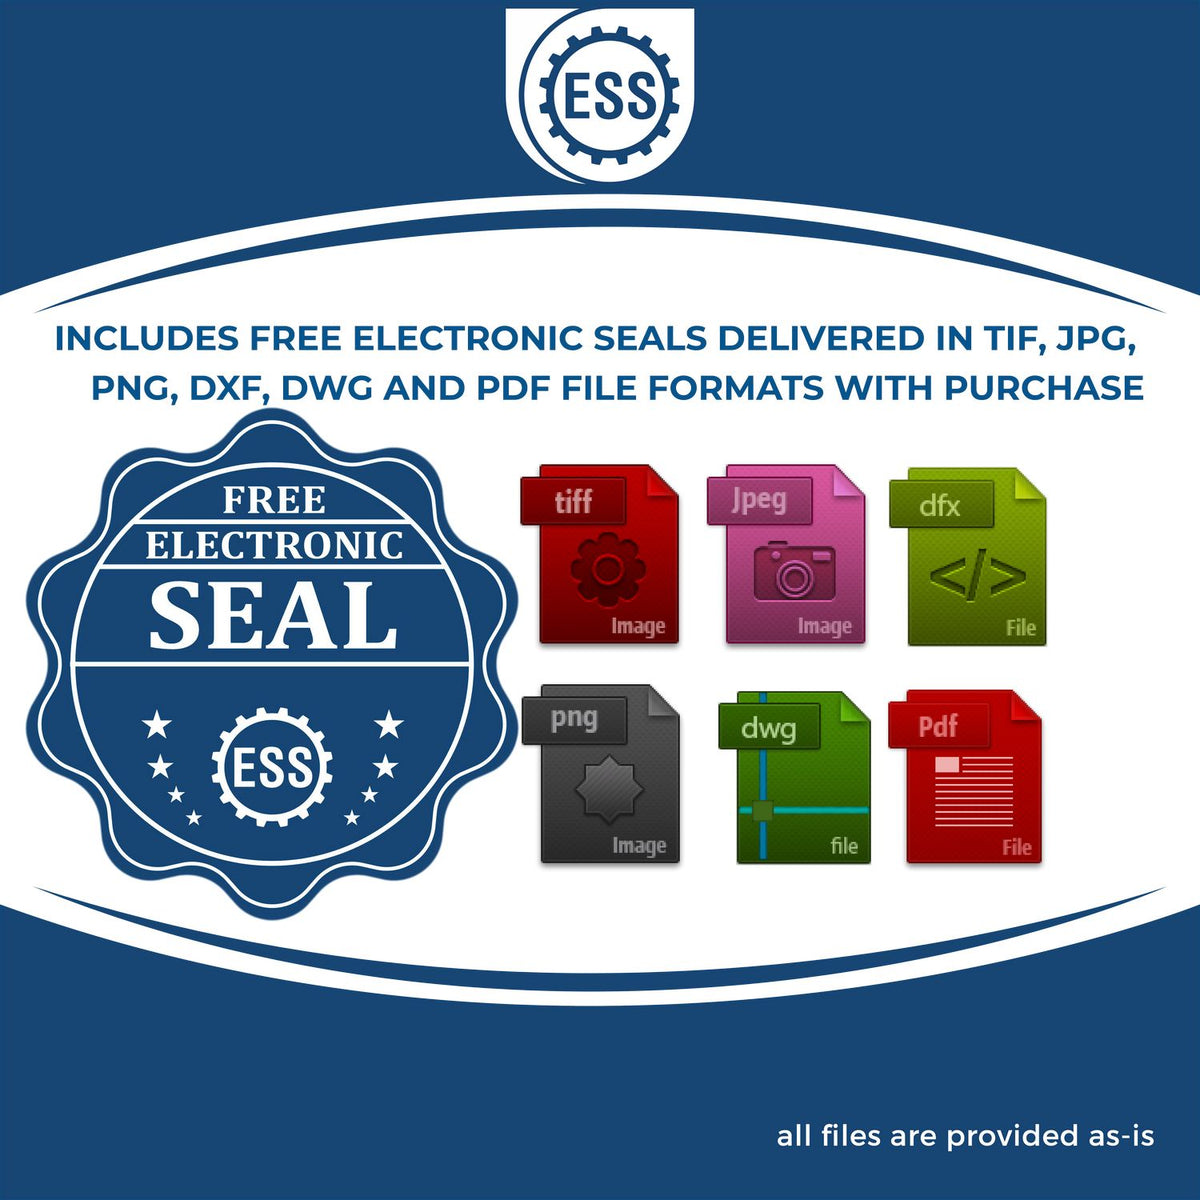 An infographic for the free electronic seal for the Wooden Handle Massachusetts State Seal Notary Public Stamp illustrating the different file type icons such as DXF, DWG, TIF, JPG and PNG.